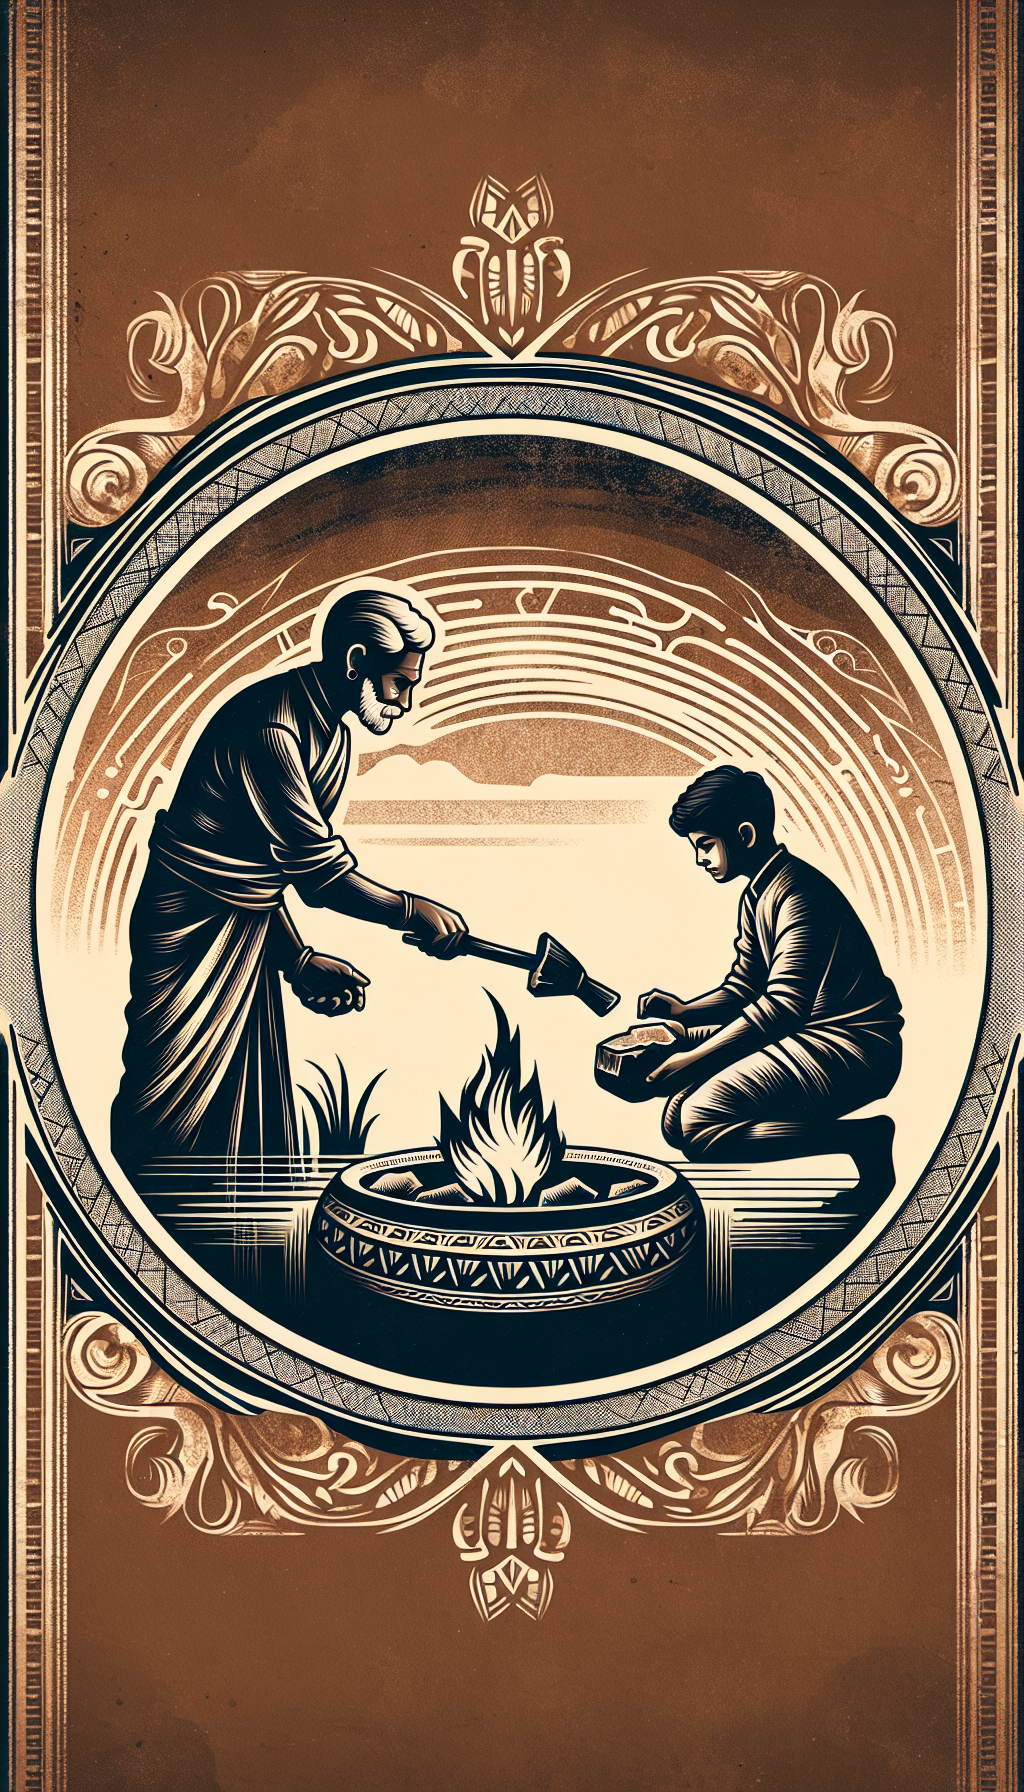 An illustration depicts an elder teaching a young apprentice the ancient Indian fire-starting method using flint rocks, with the scene artfully blended into the silhouette of a majestic traditional Indian fire pit. Both figures are in traditional attire, and the edges of the image are adorned with faded tribal patterns, symbolizing the timeless value of cultural preservation.